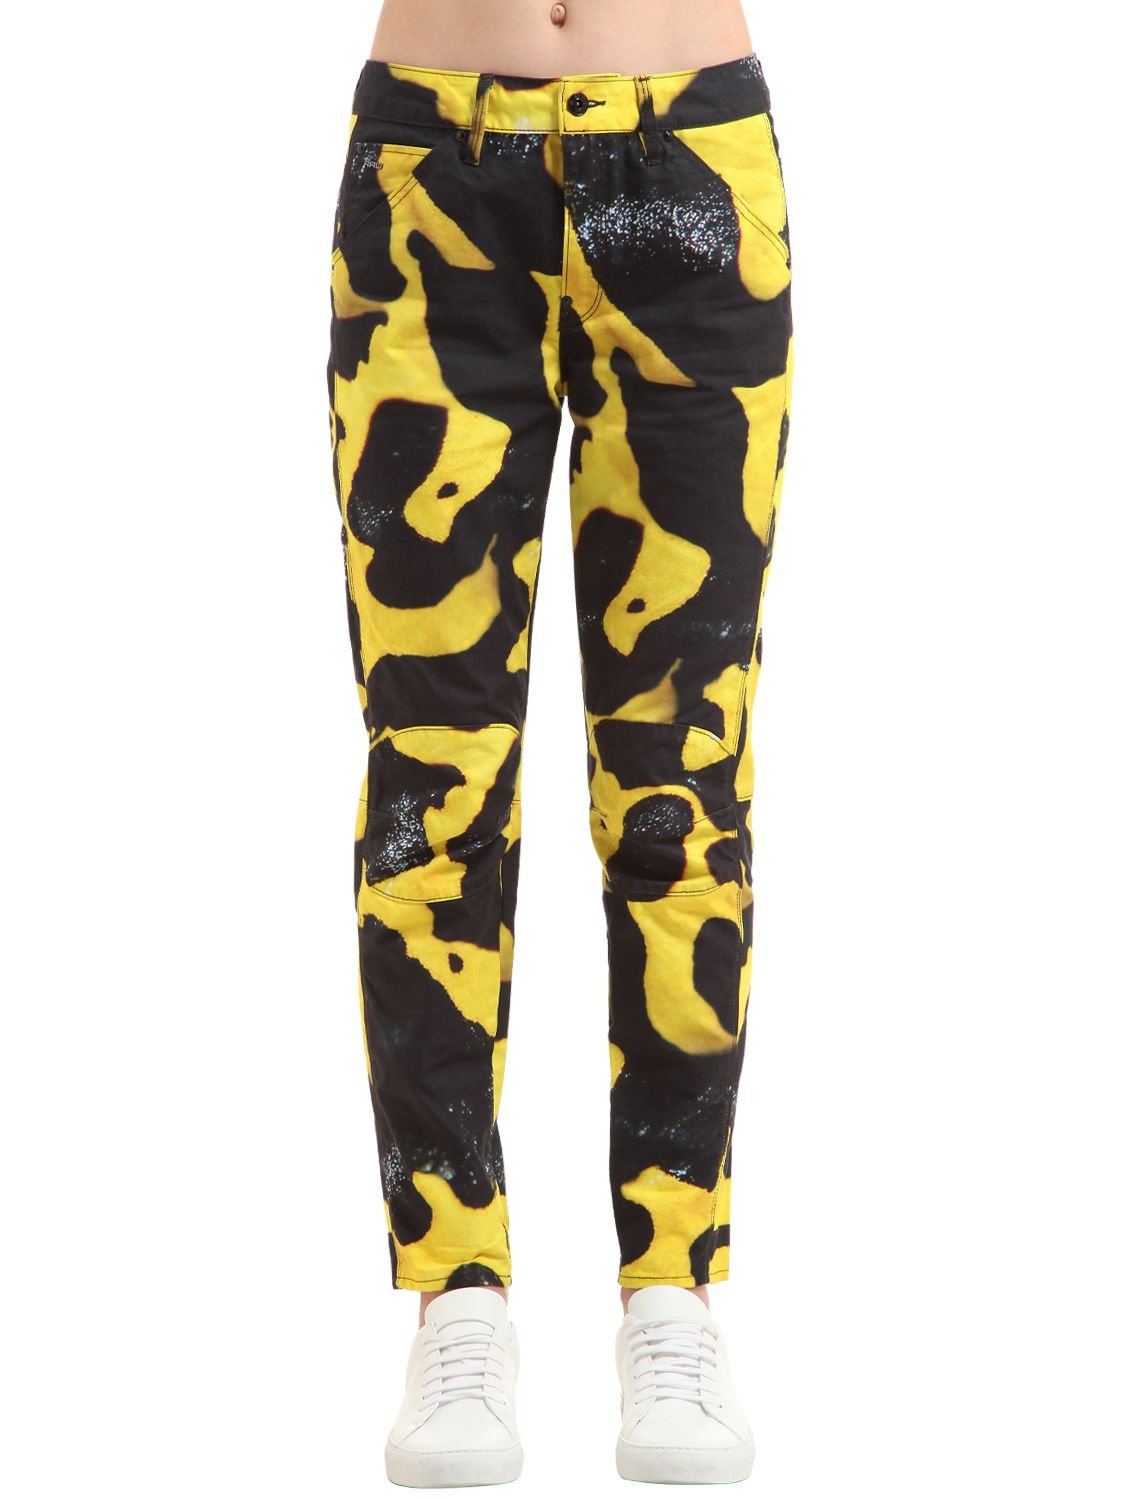 G-star By Pharrell Williams Elwood Bumblebee Poison Frog Print Jeans In Black/yellow